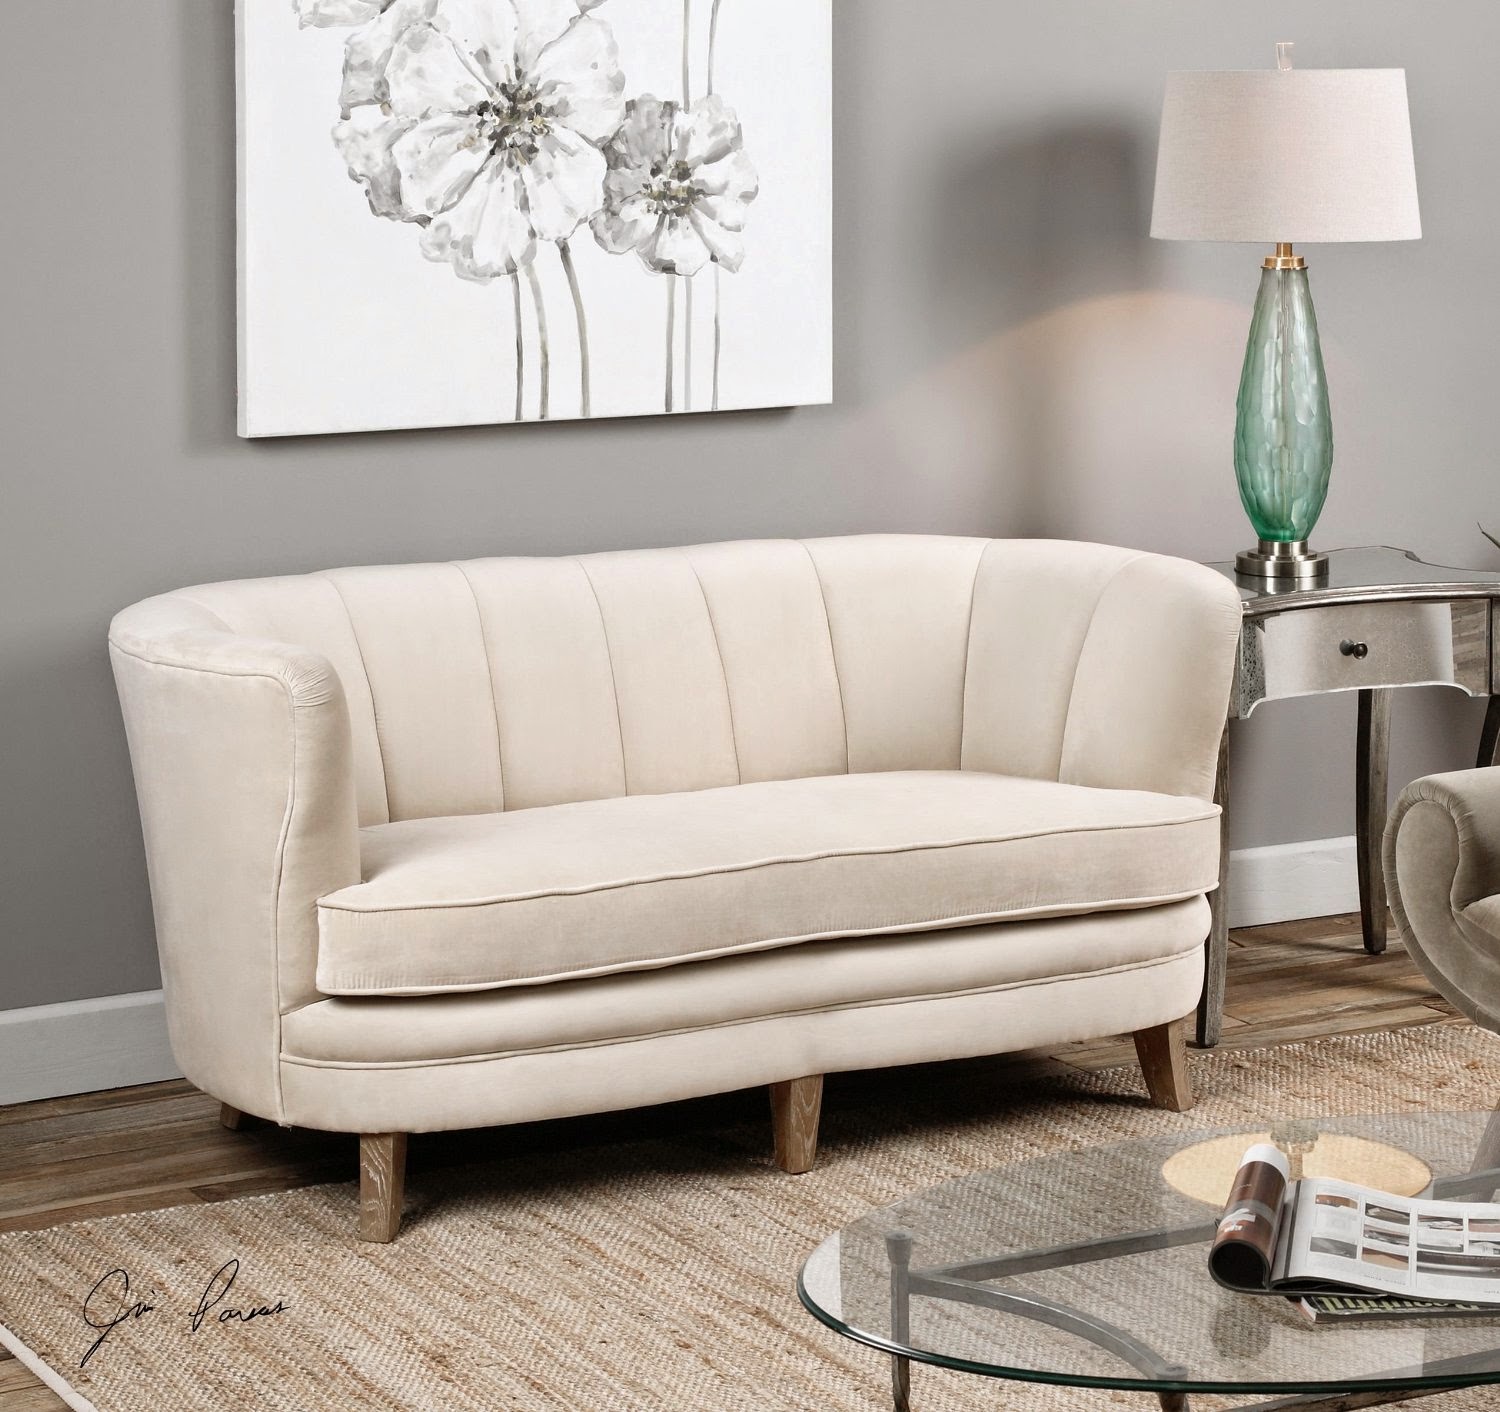 Curved Sofas For Sale: Curved Loveseat Sofa